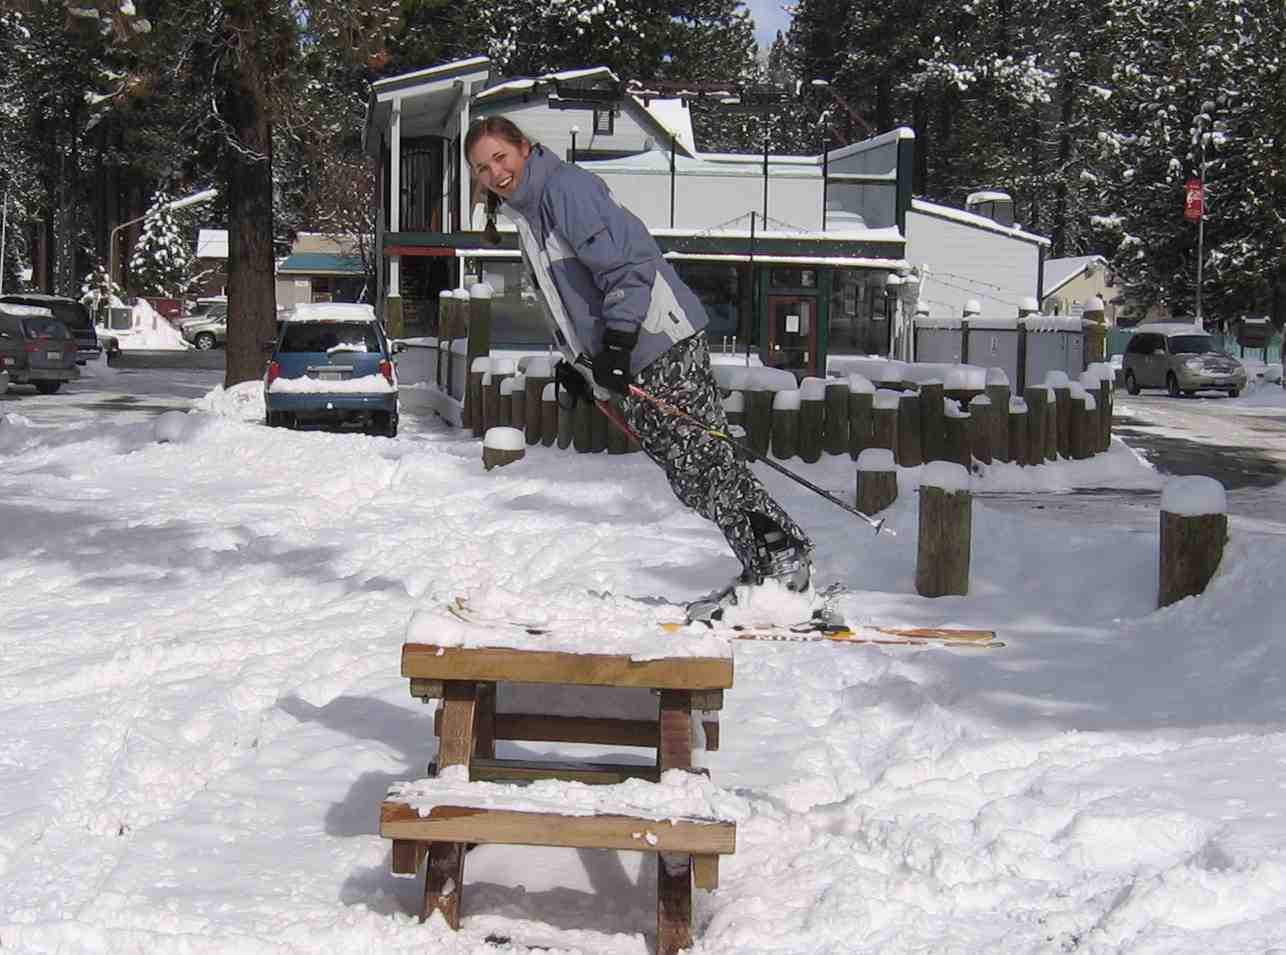 After skiing I play on picnic tables